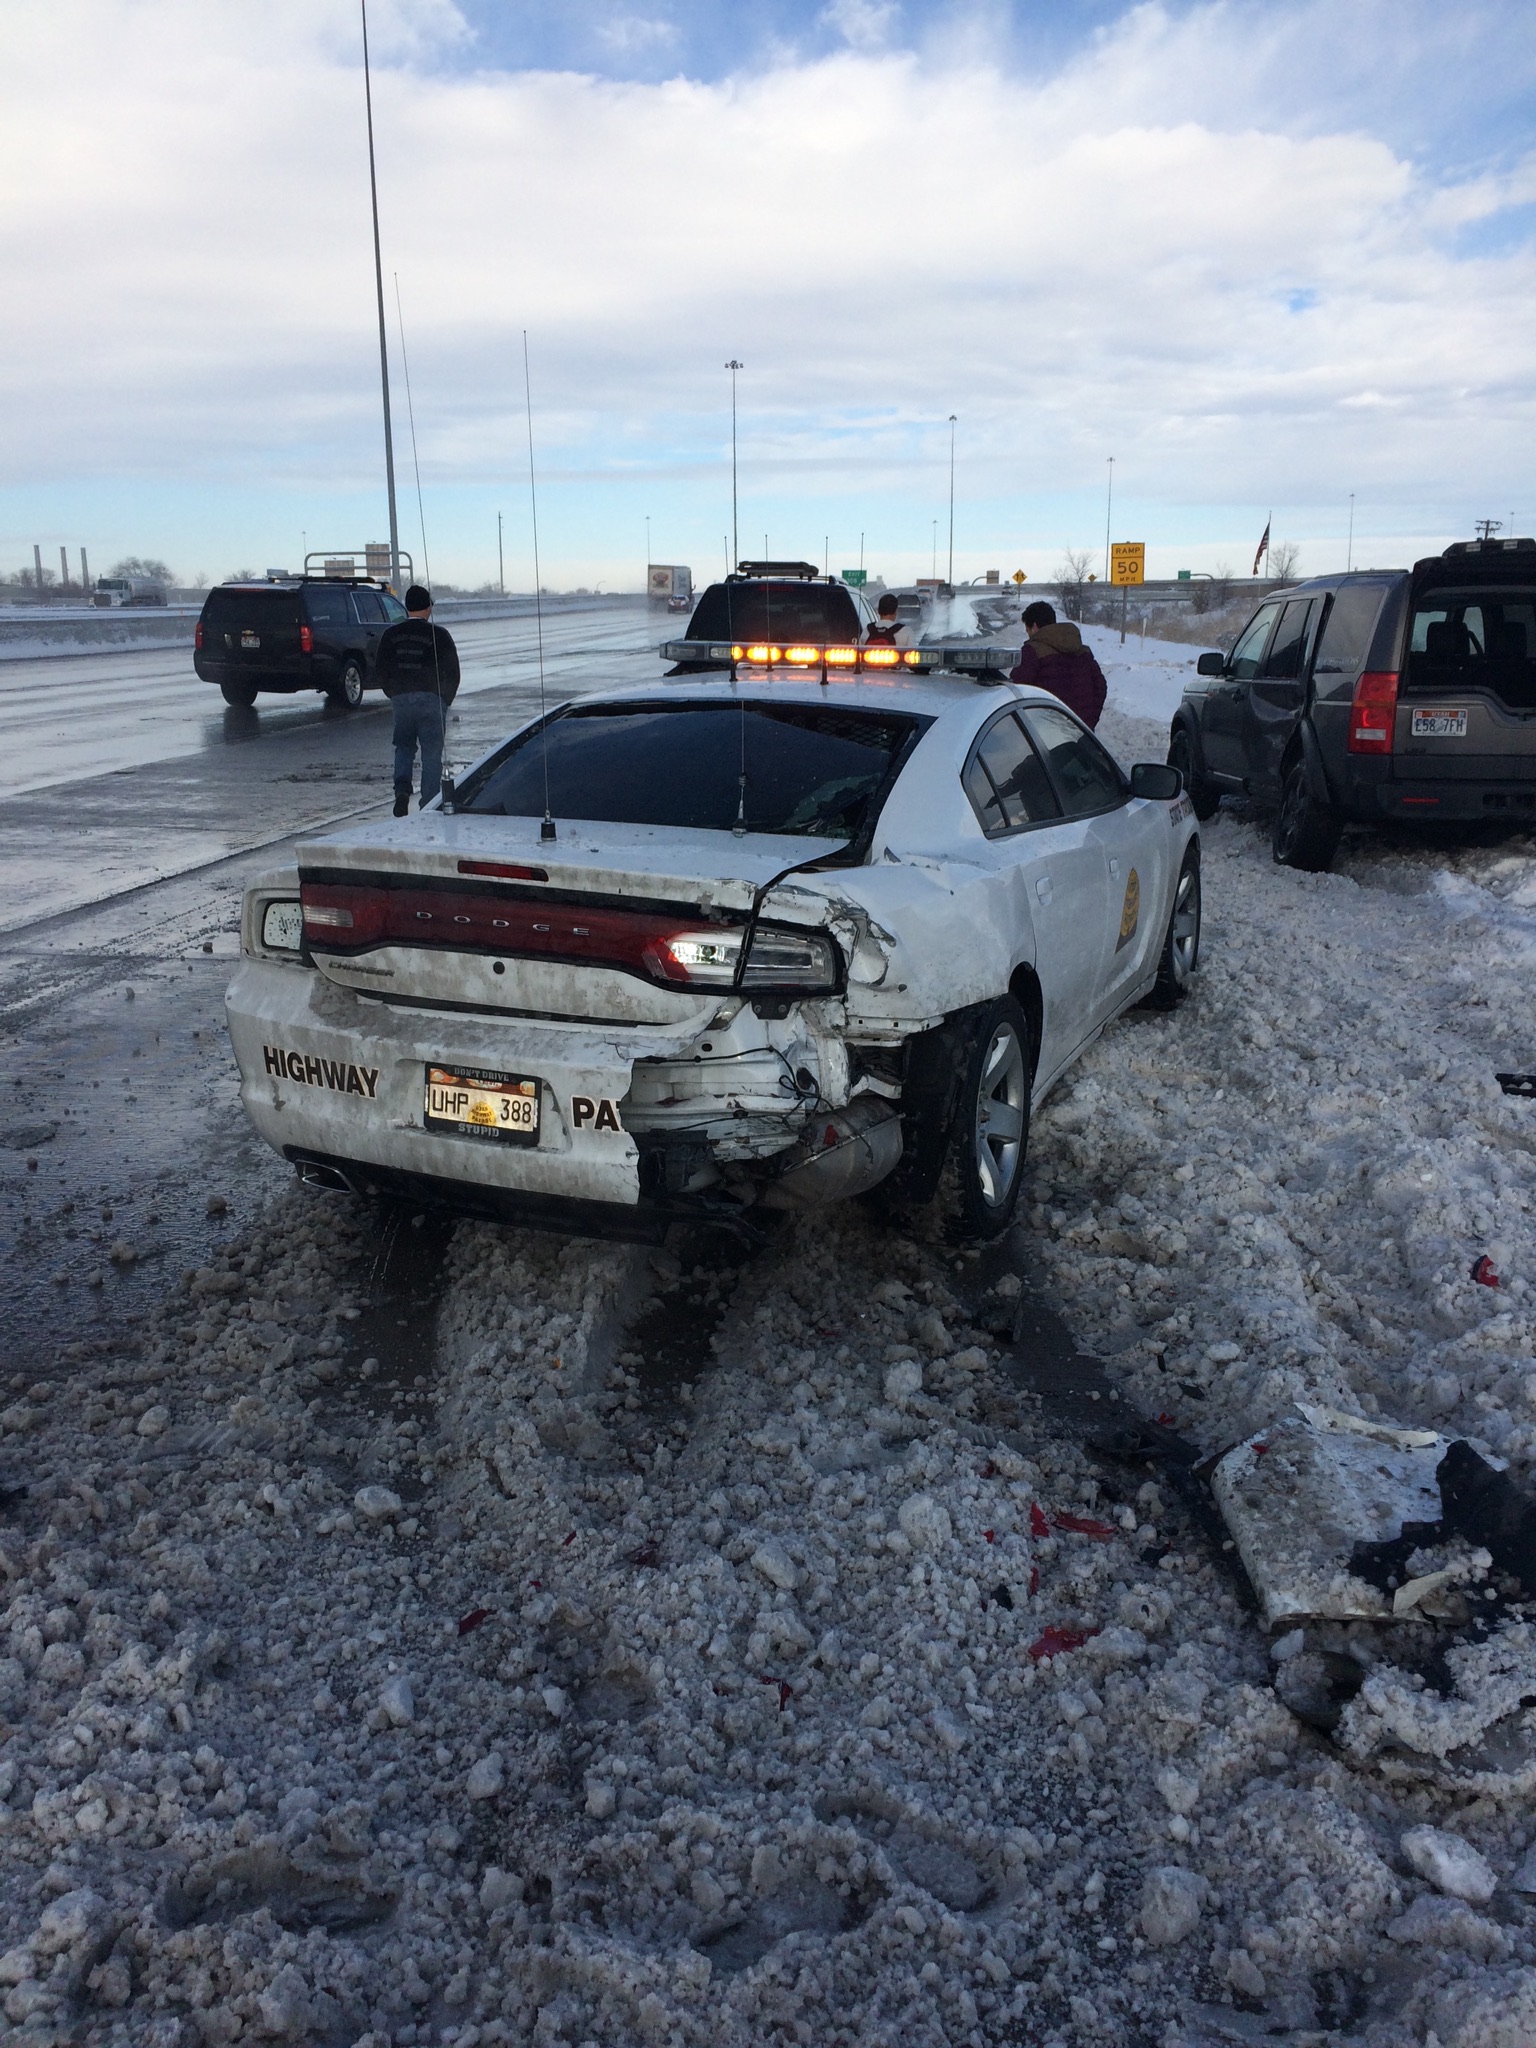 A UHP trooper's vehicle received significant damage when a car crashed into it on the road shoulder.